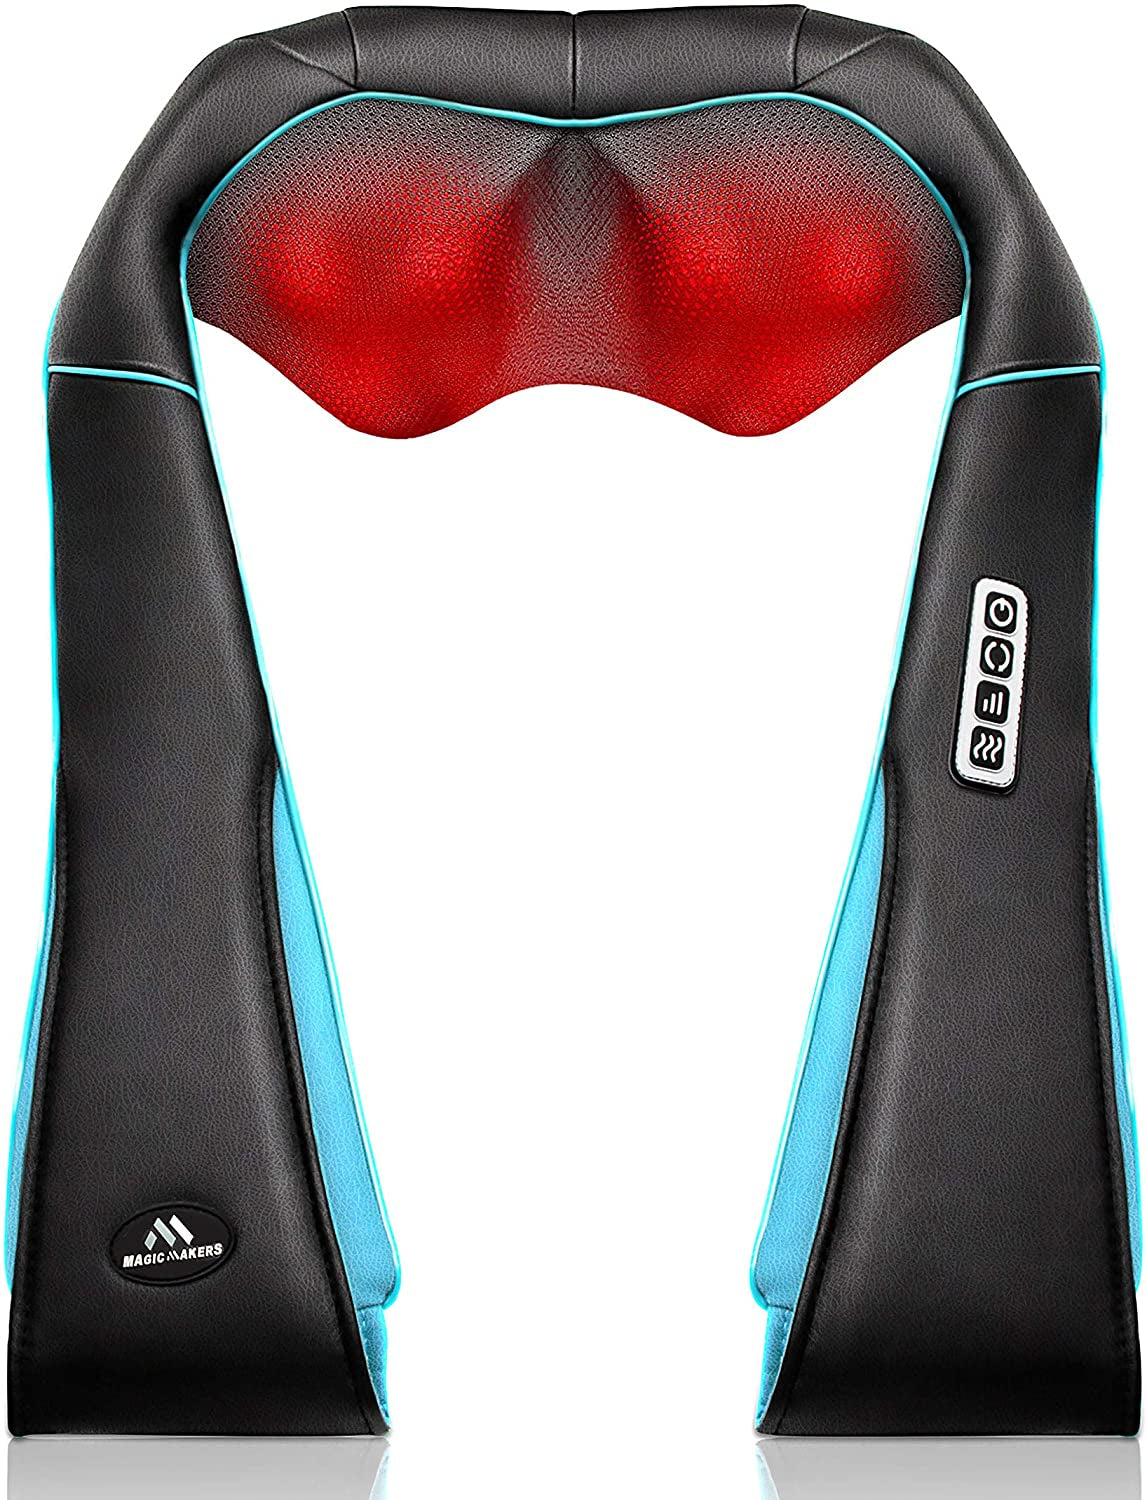 Neck Massager with Heat Gifts for Women, Men, Dad, Mom, Family, Friend, Mothers Day, Fathers Day, Christmas, Shiatsu Kneading Back Neck Massager for Shoulder, Pain Relief, Muscle Soreness